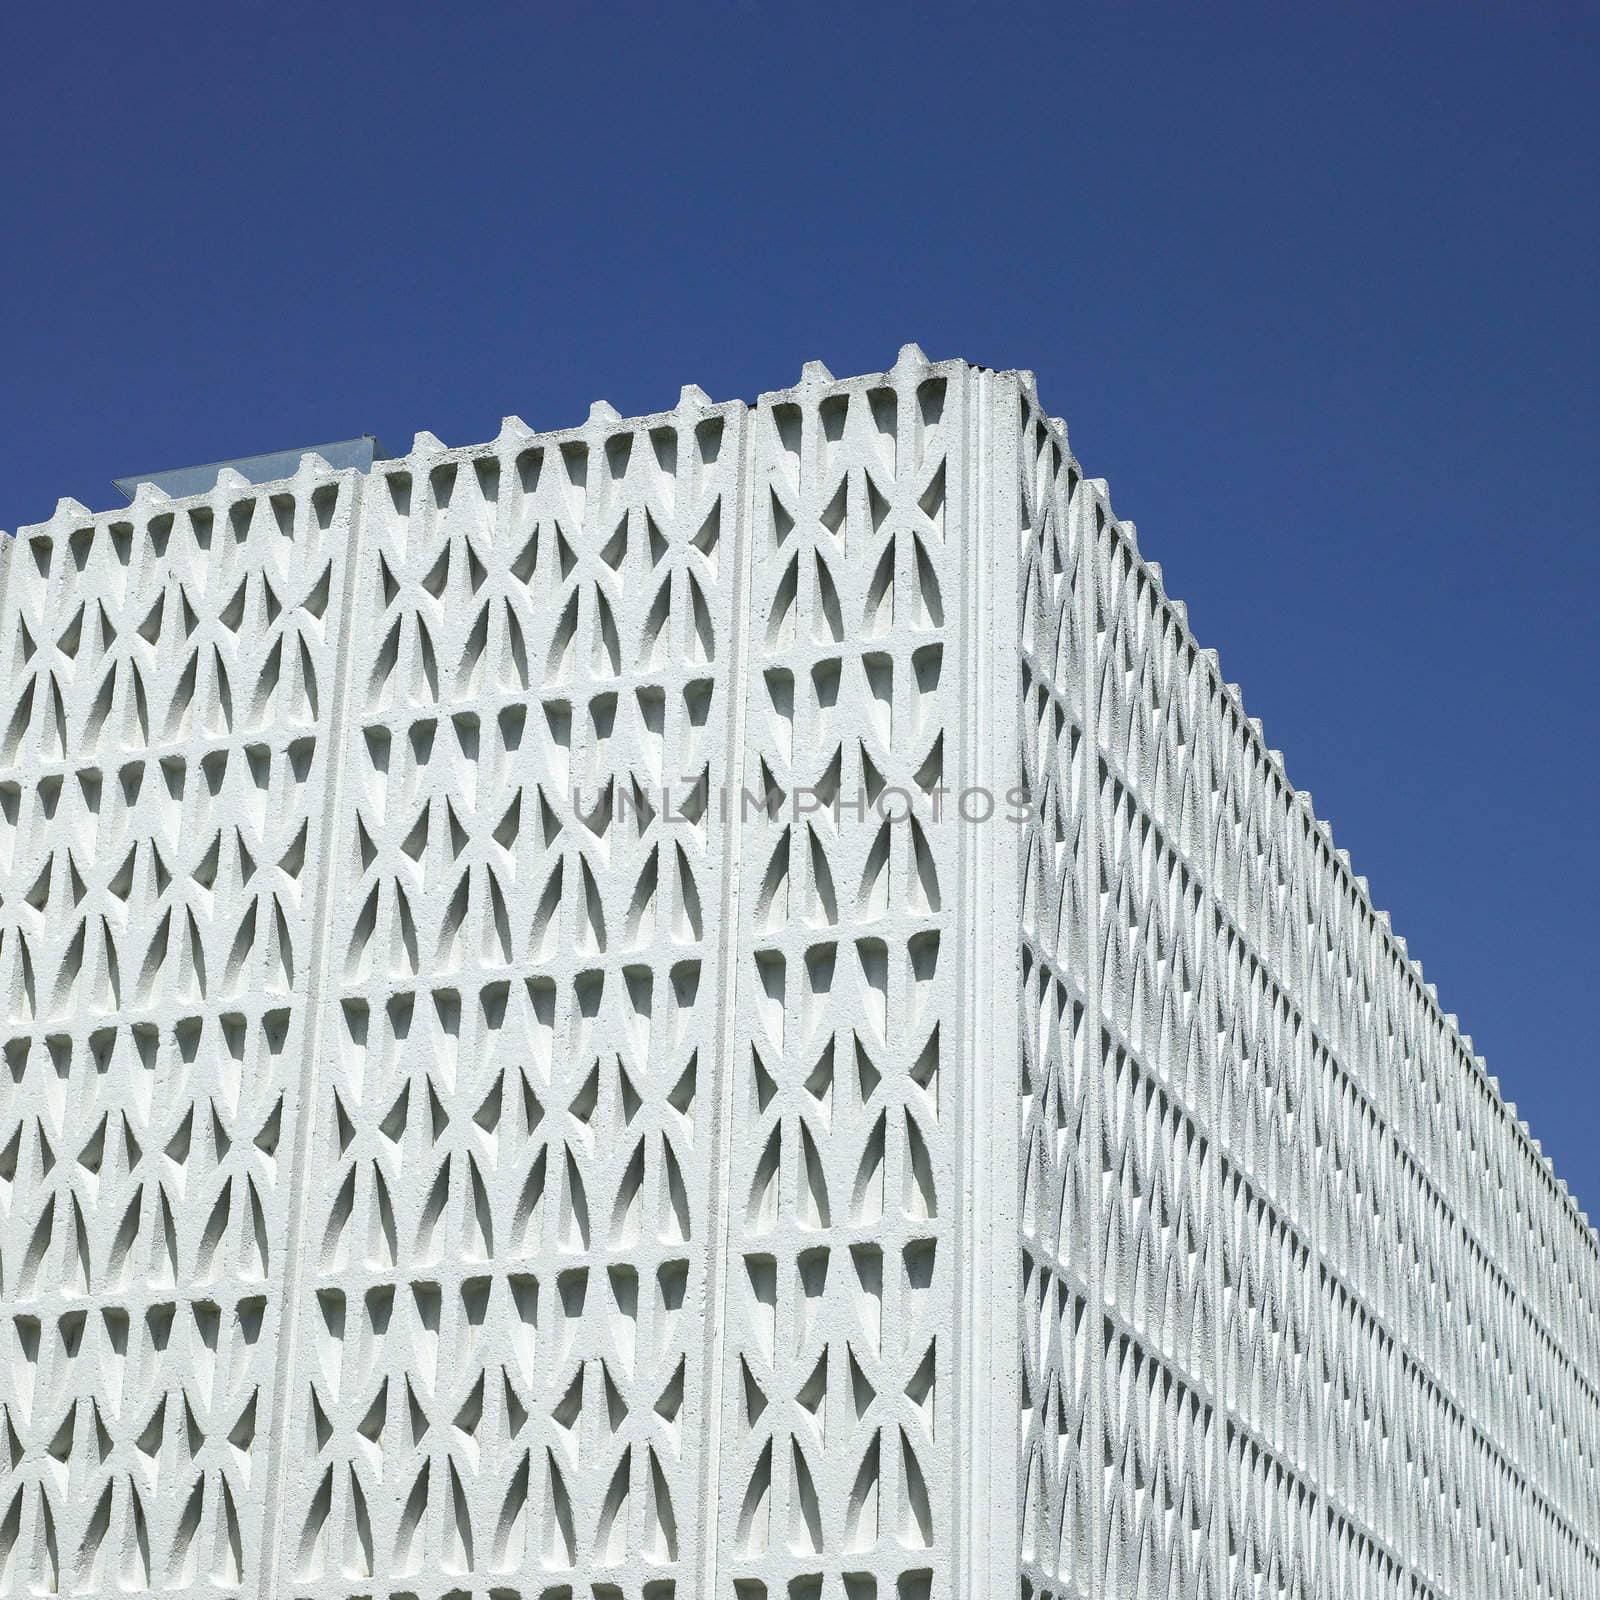 Patterned wall and blue sky